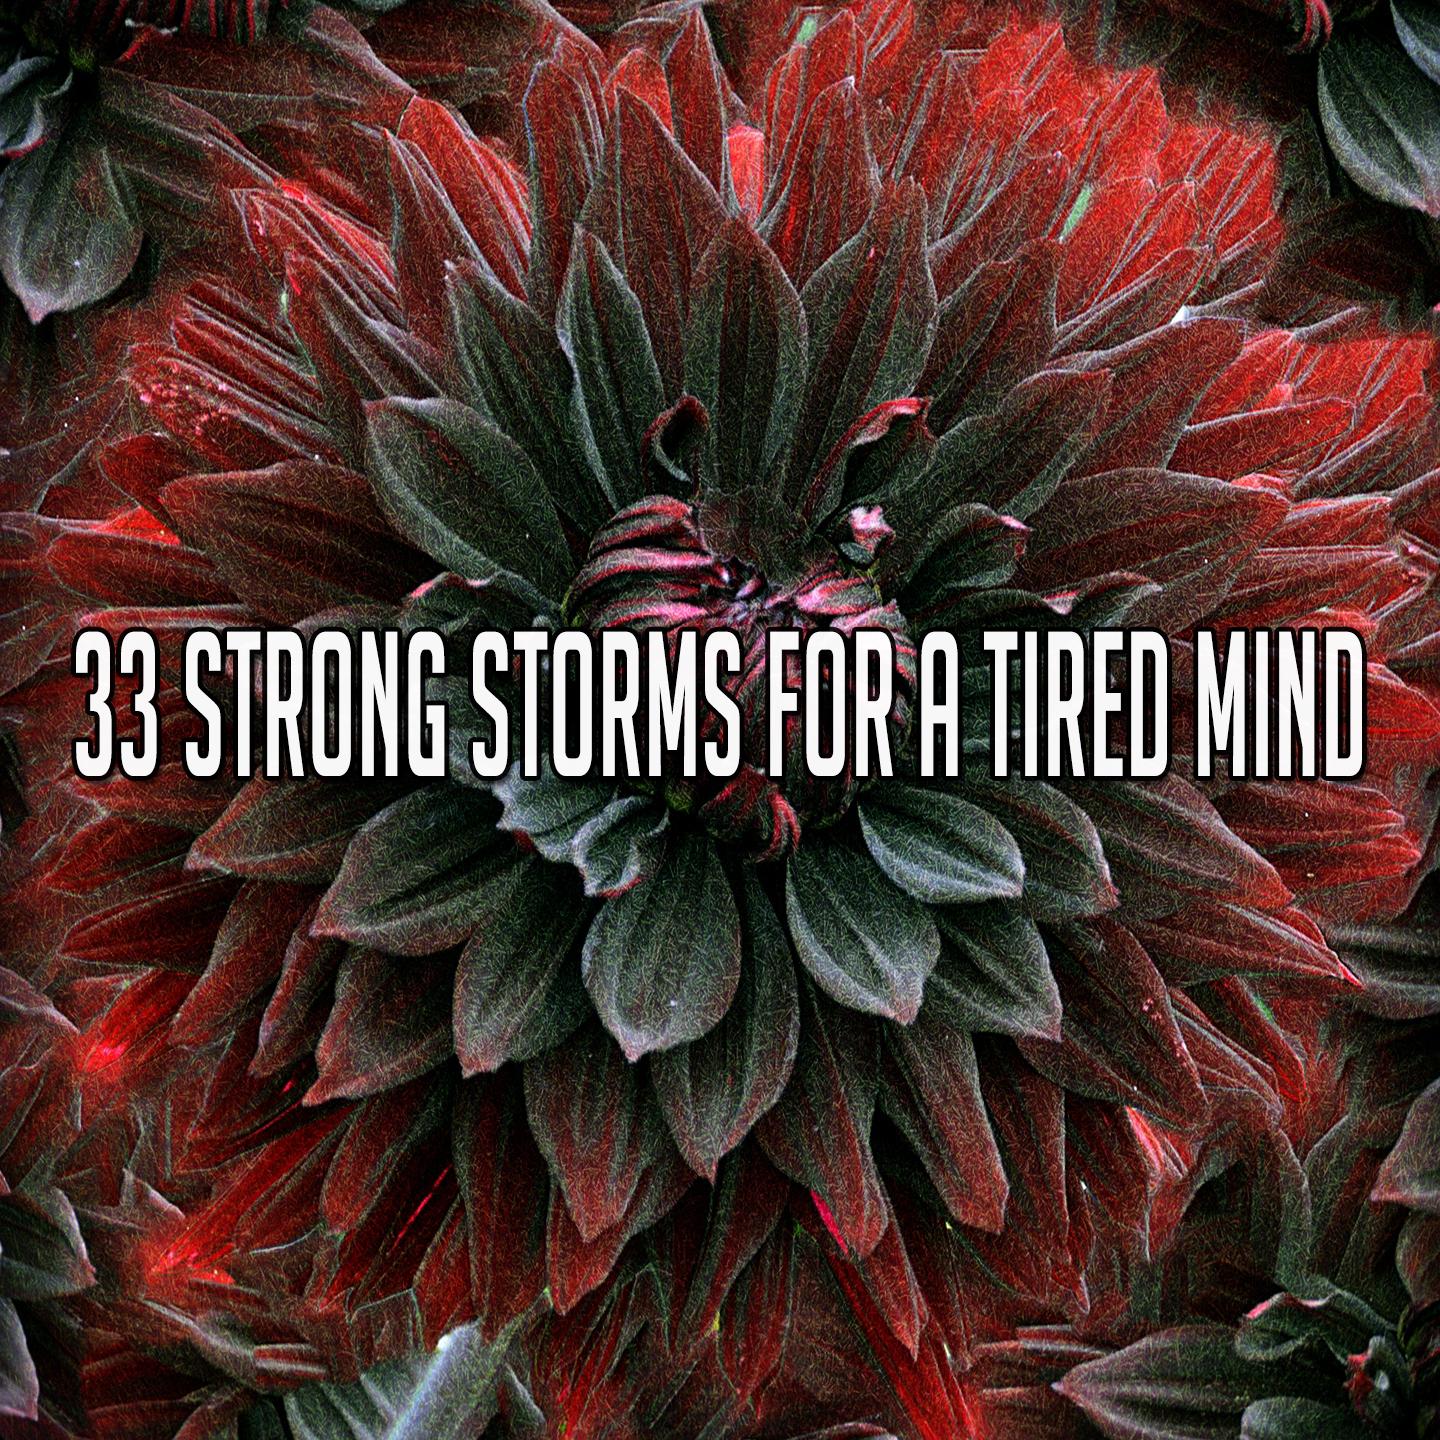 33 Strong Storms for a Tired Mind